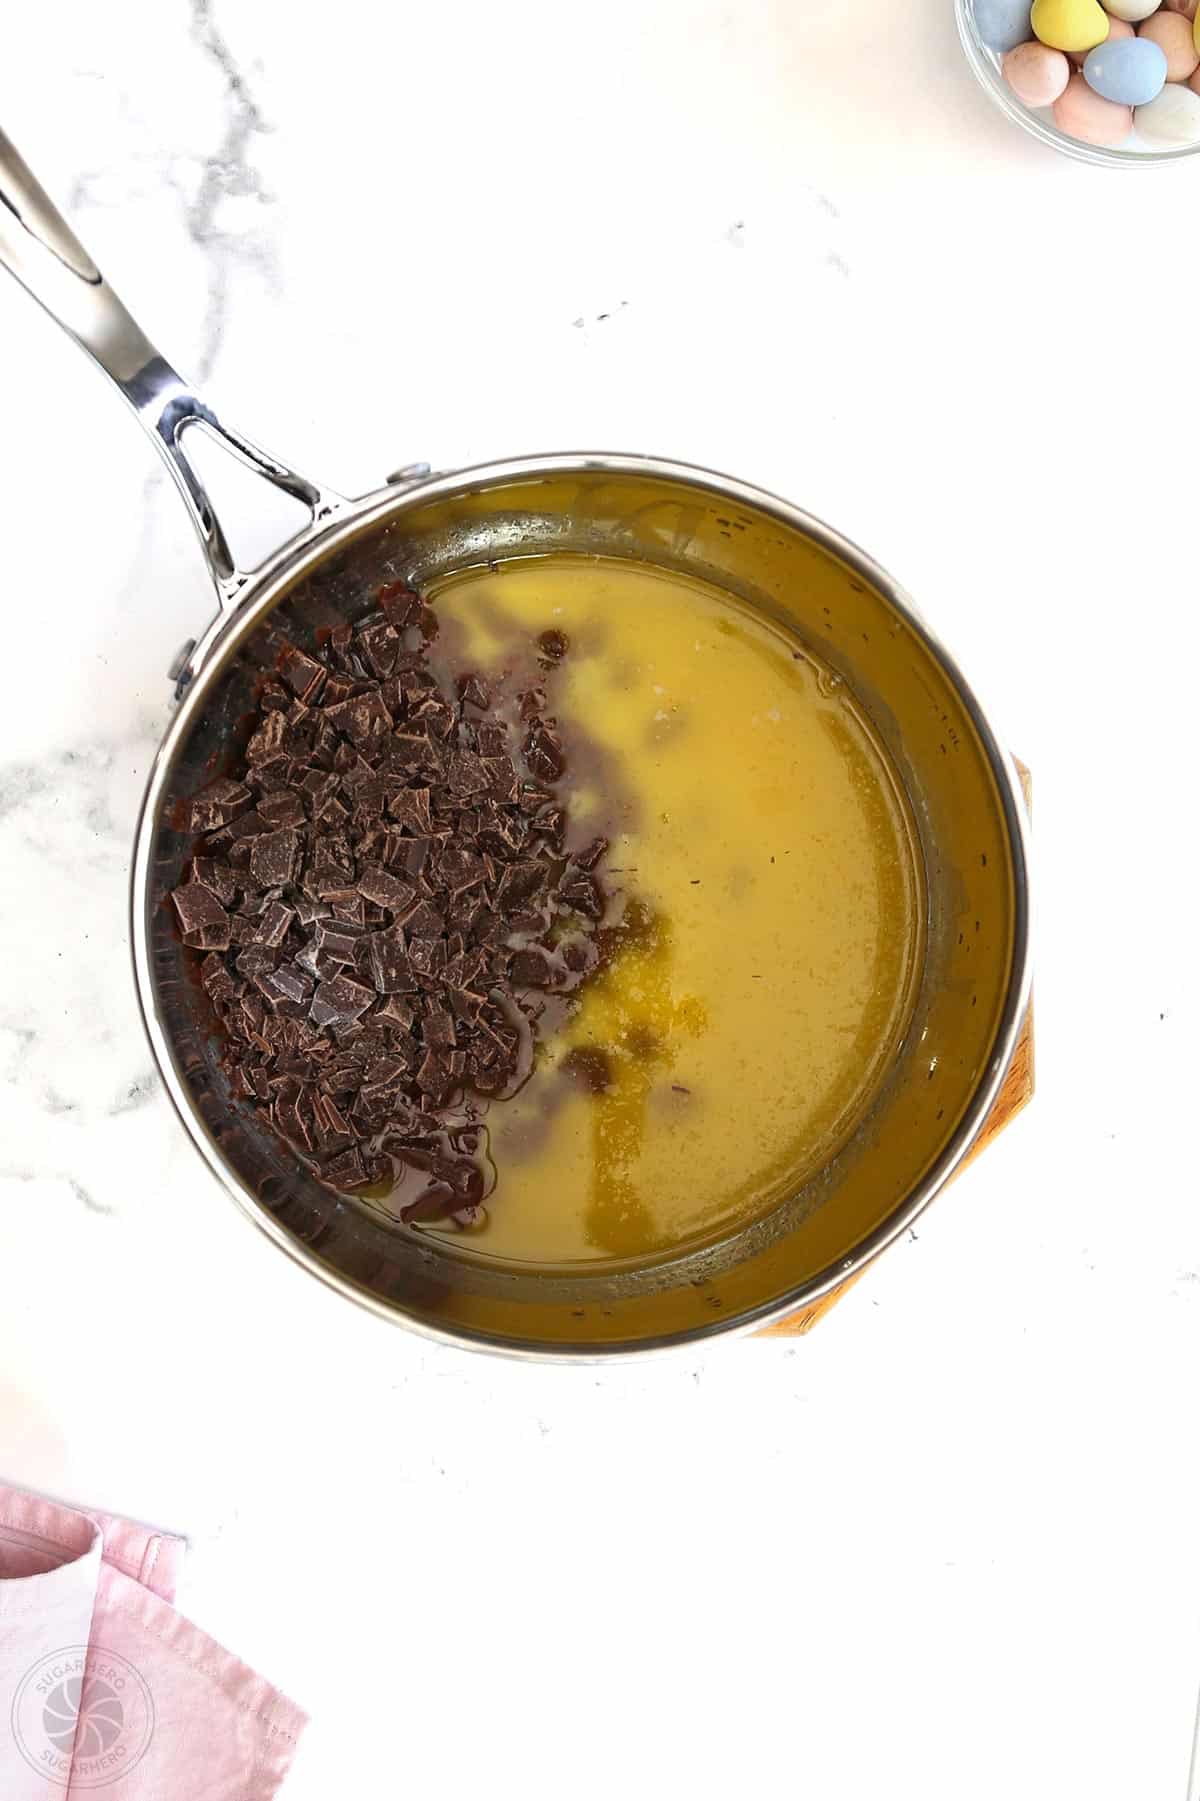 Combining melted butter and chopped chocolate.